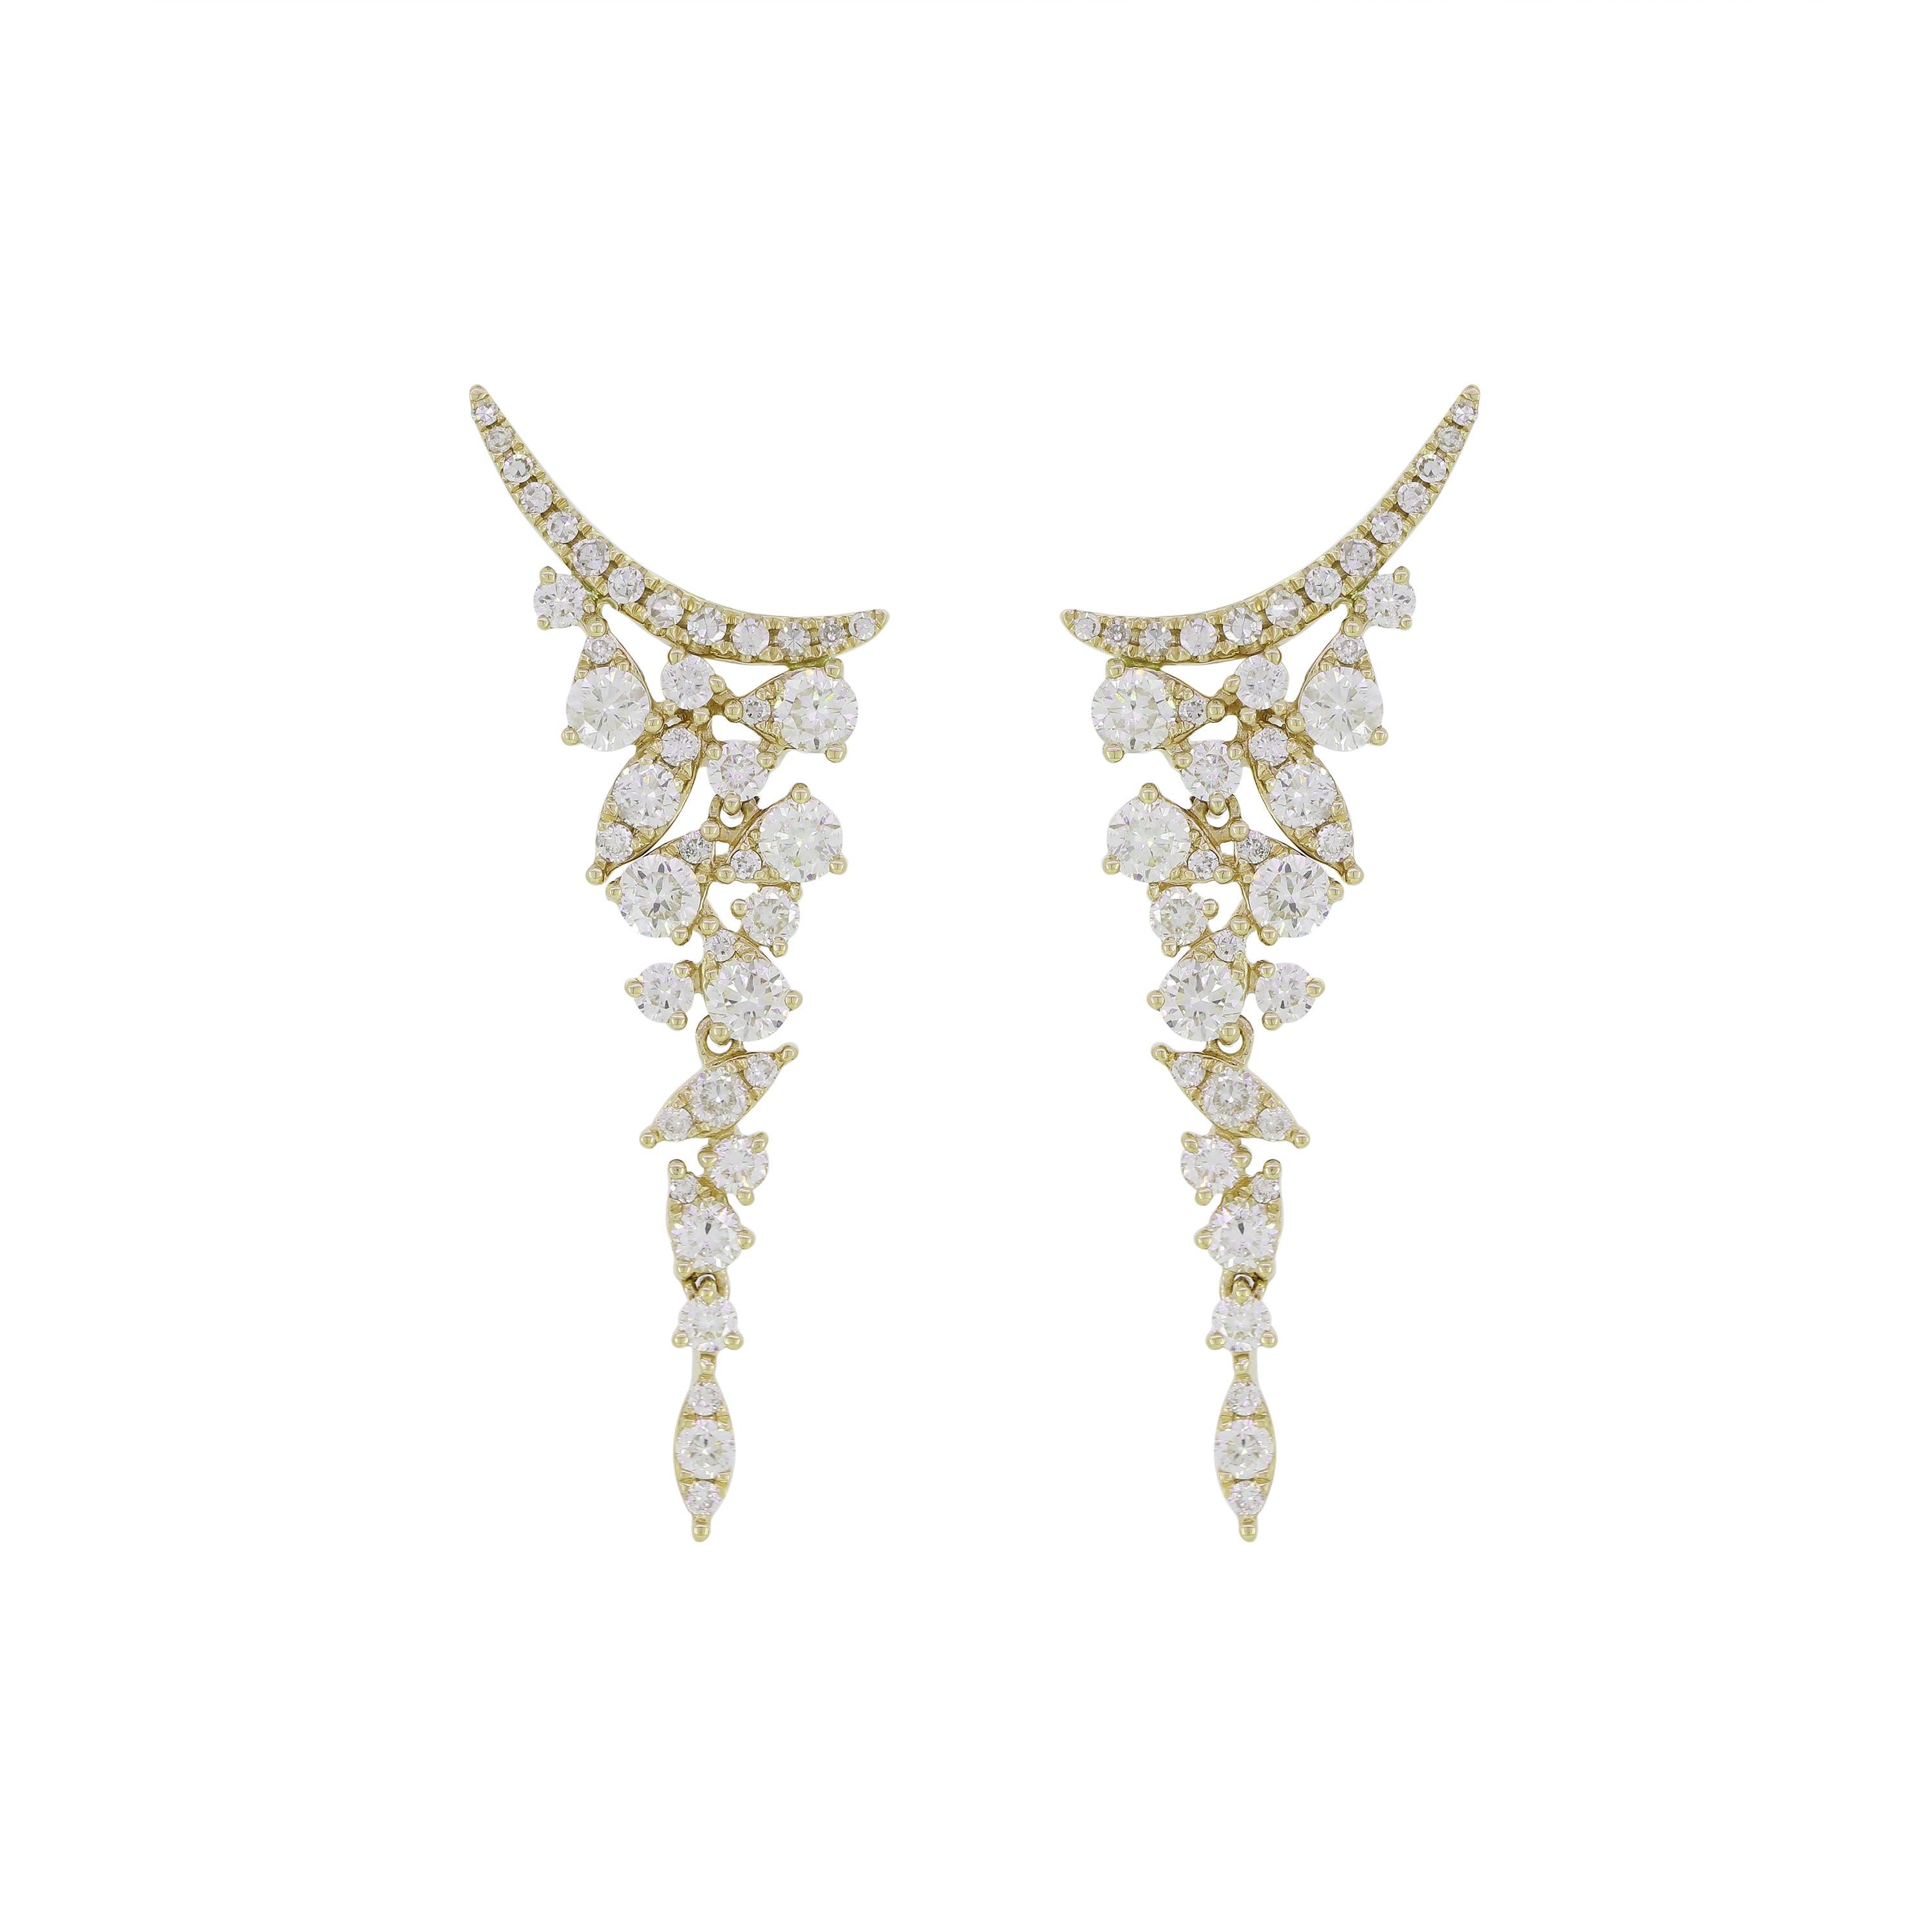 You will definitely fall in love with these Luxle Round Diamond Chandelier Drop Earrings. Rendered in 18K yellow gold these elegant chandelier drops are illuminated with 82 big and small round diamonds totaling 1.15 Cts. These yellow drops are well